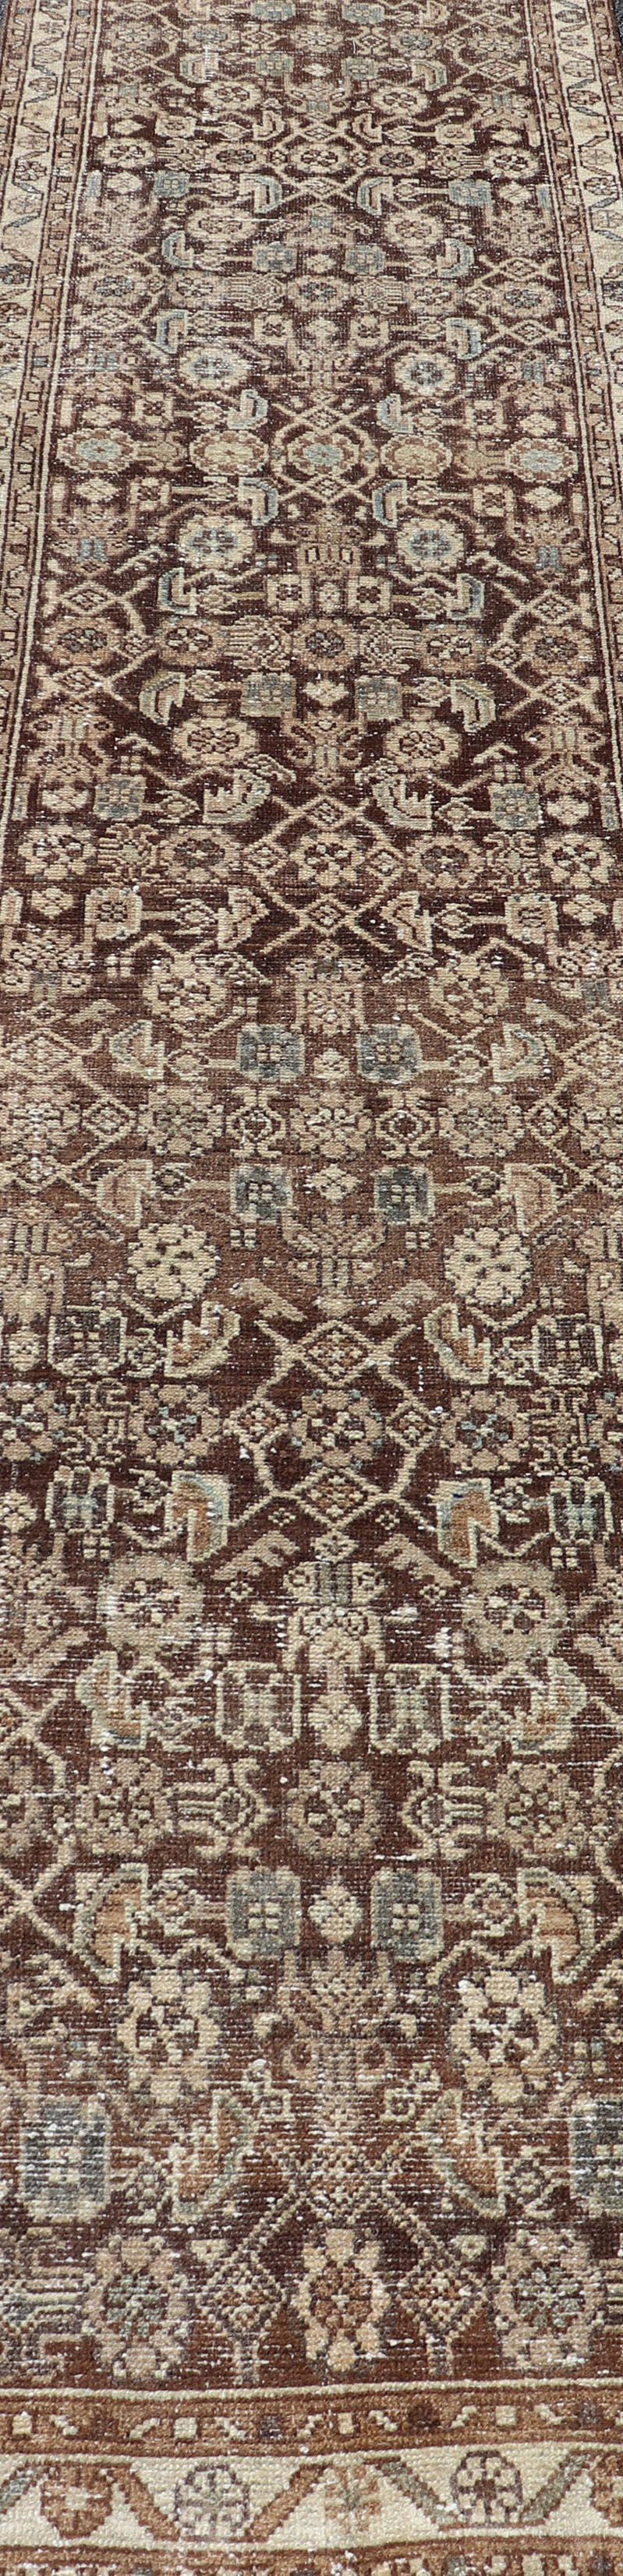 Wool Antique Persian Hamadan Runner in Warm Tones of Grey, Brown, and L. Brown For Sale